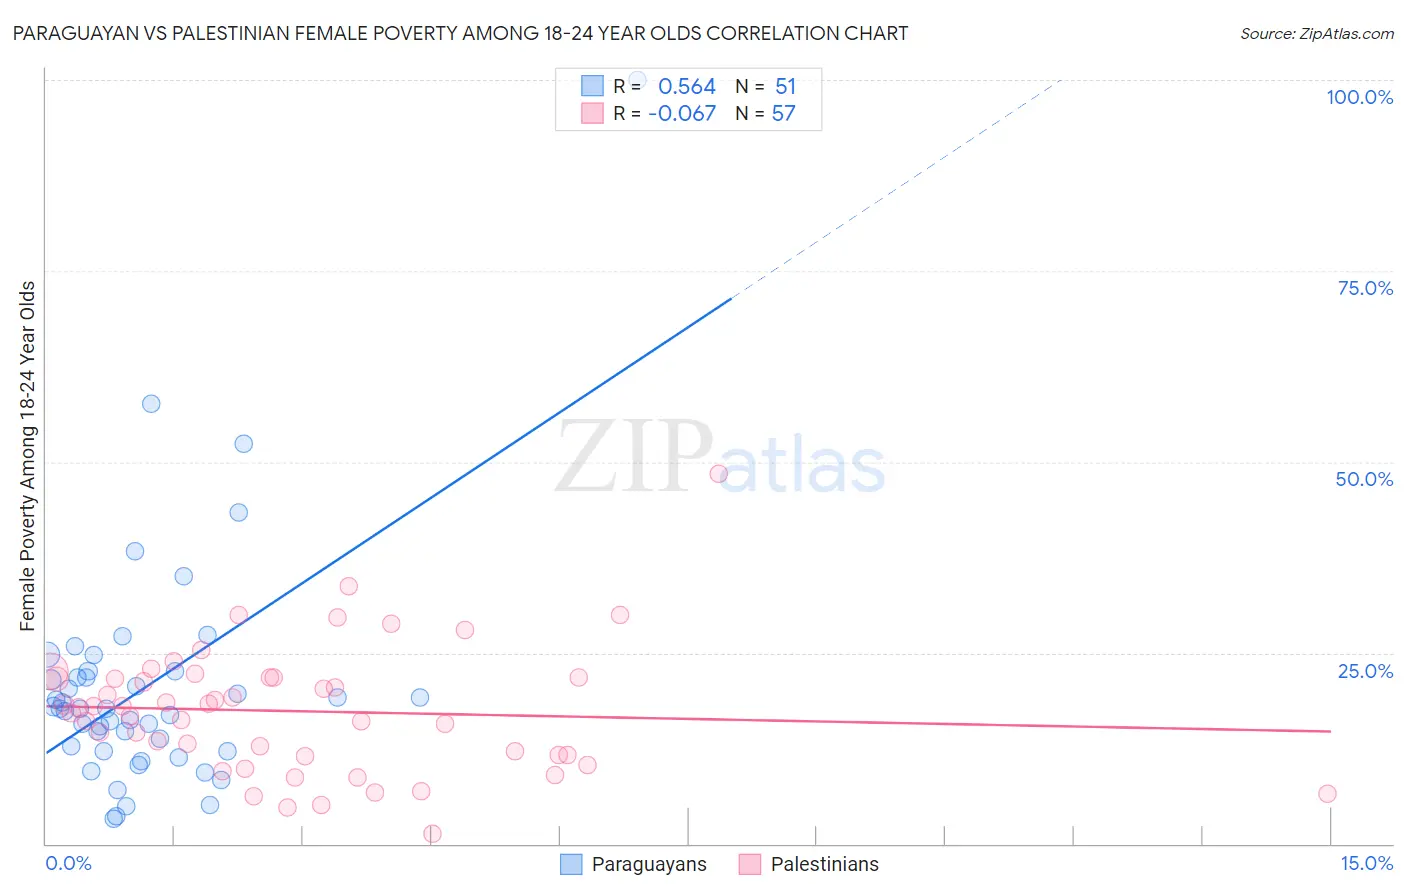 Paraguayan vs Palestinian Female Poverty Among 18-24 Year Olds